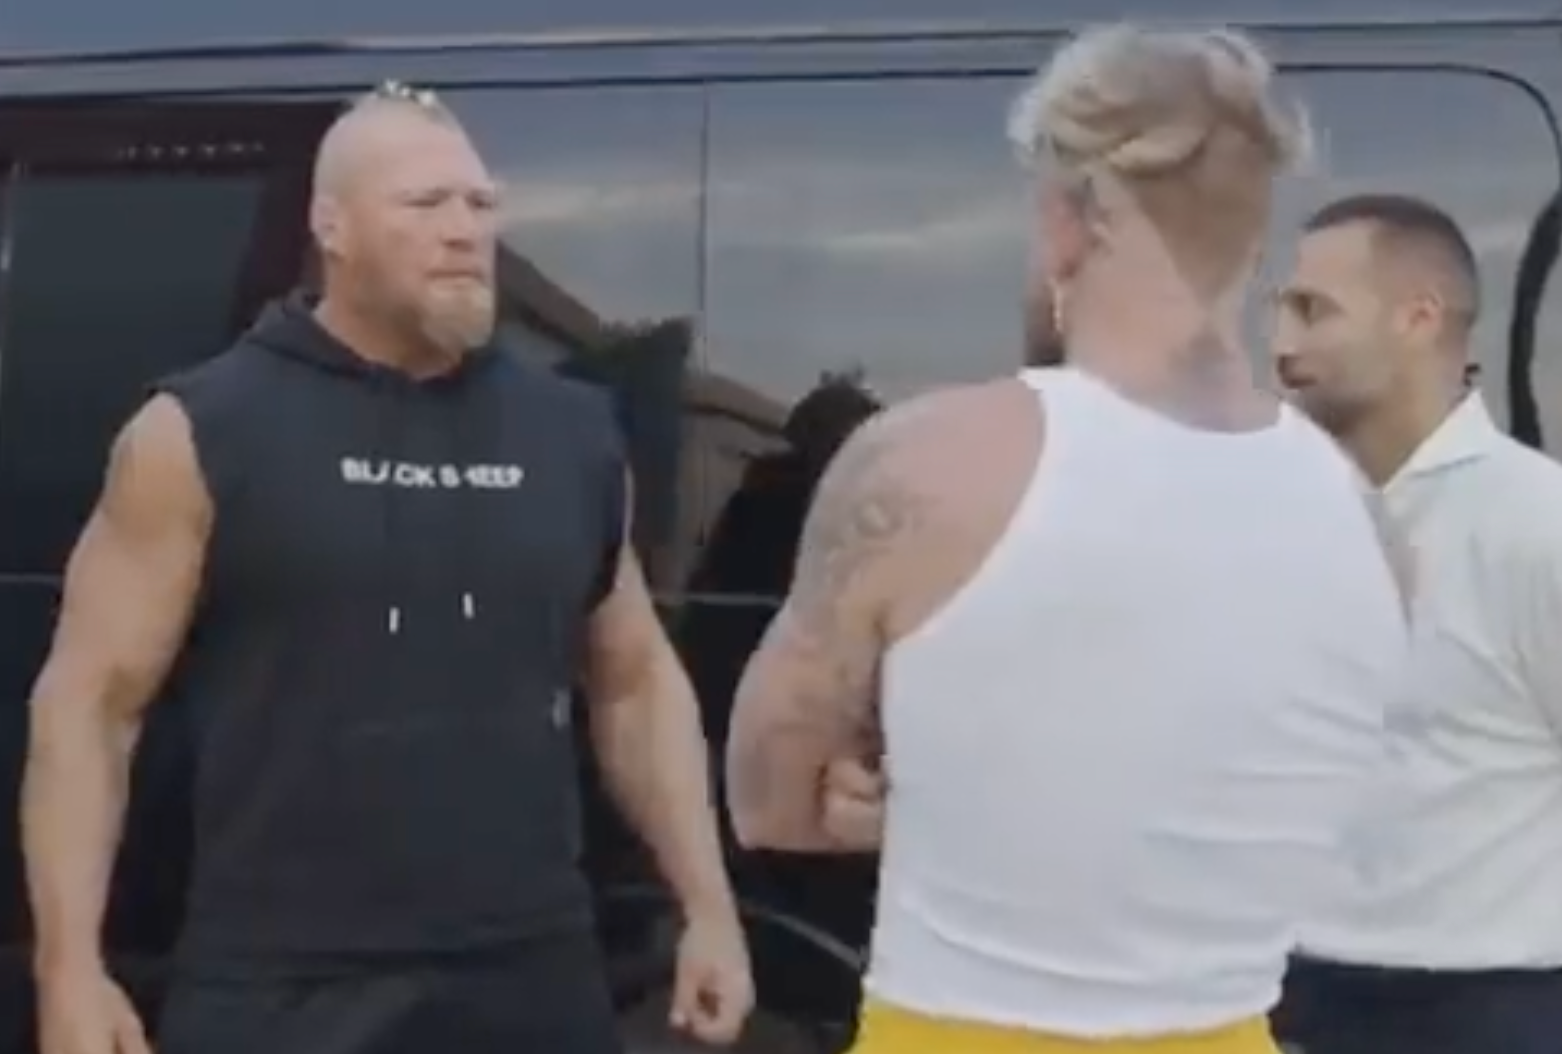 WWE: Backstage footage of Brock Lesnar letting Jake Paul know what he thinks of him